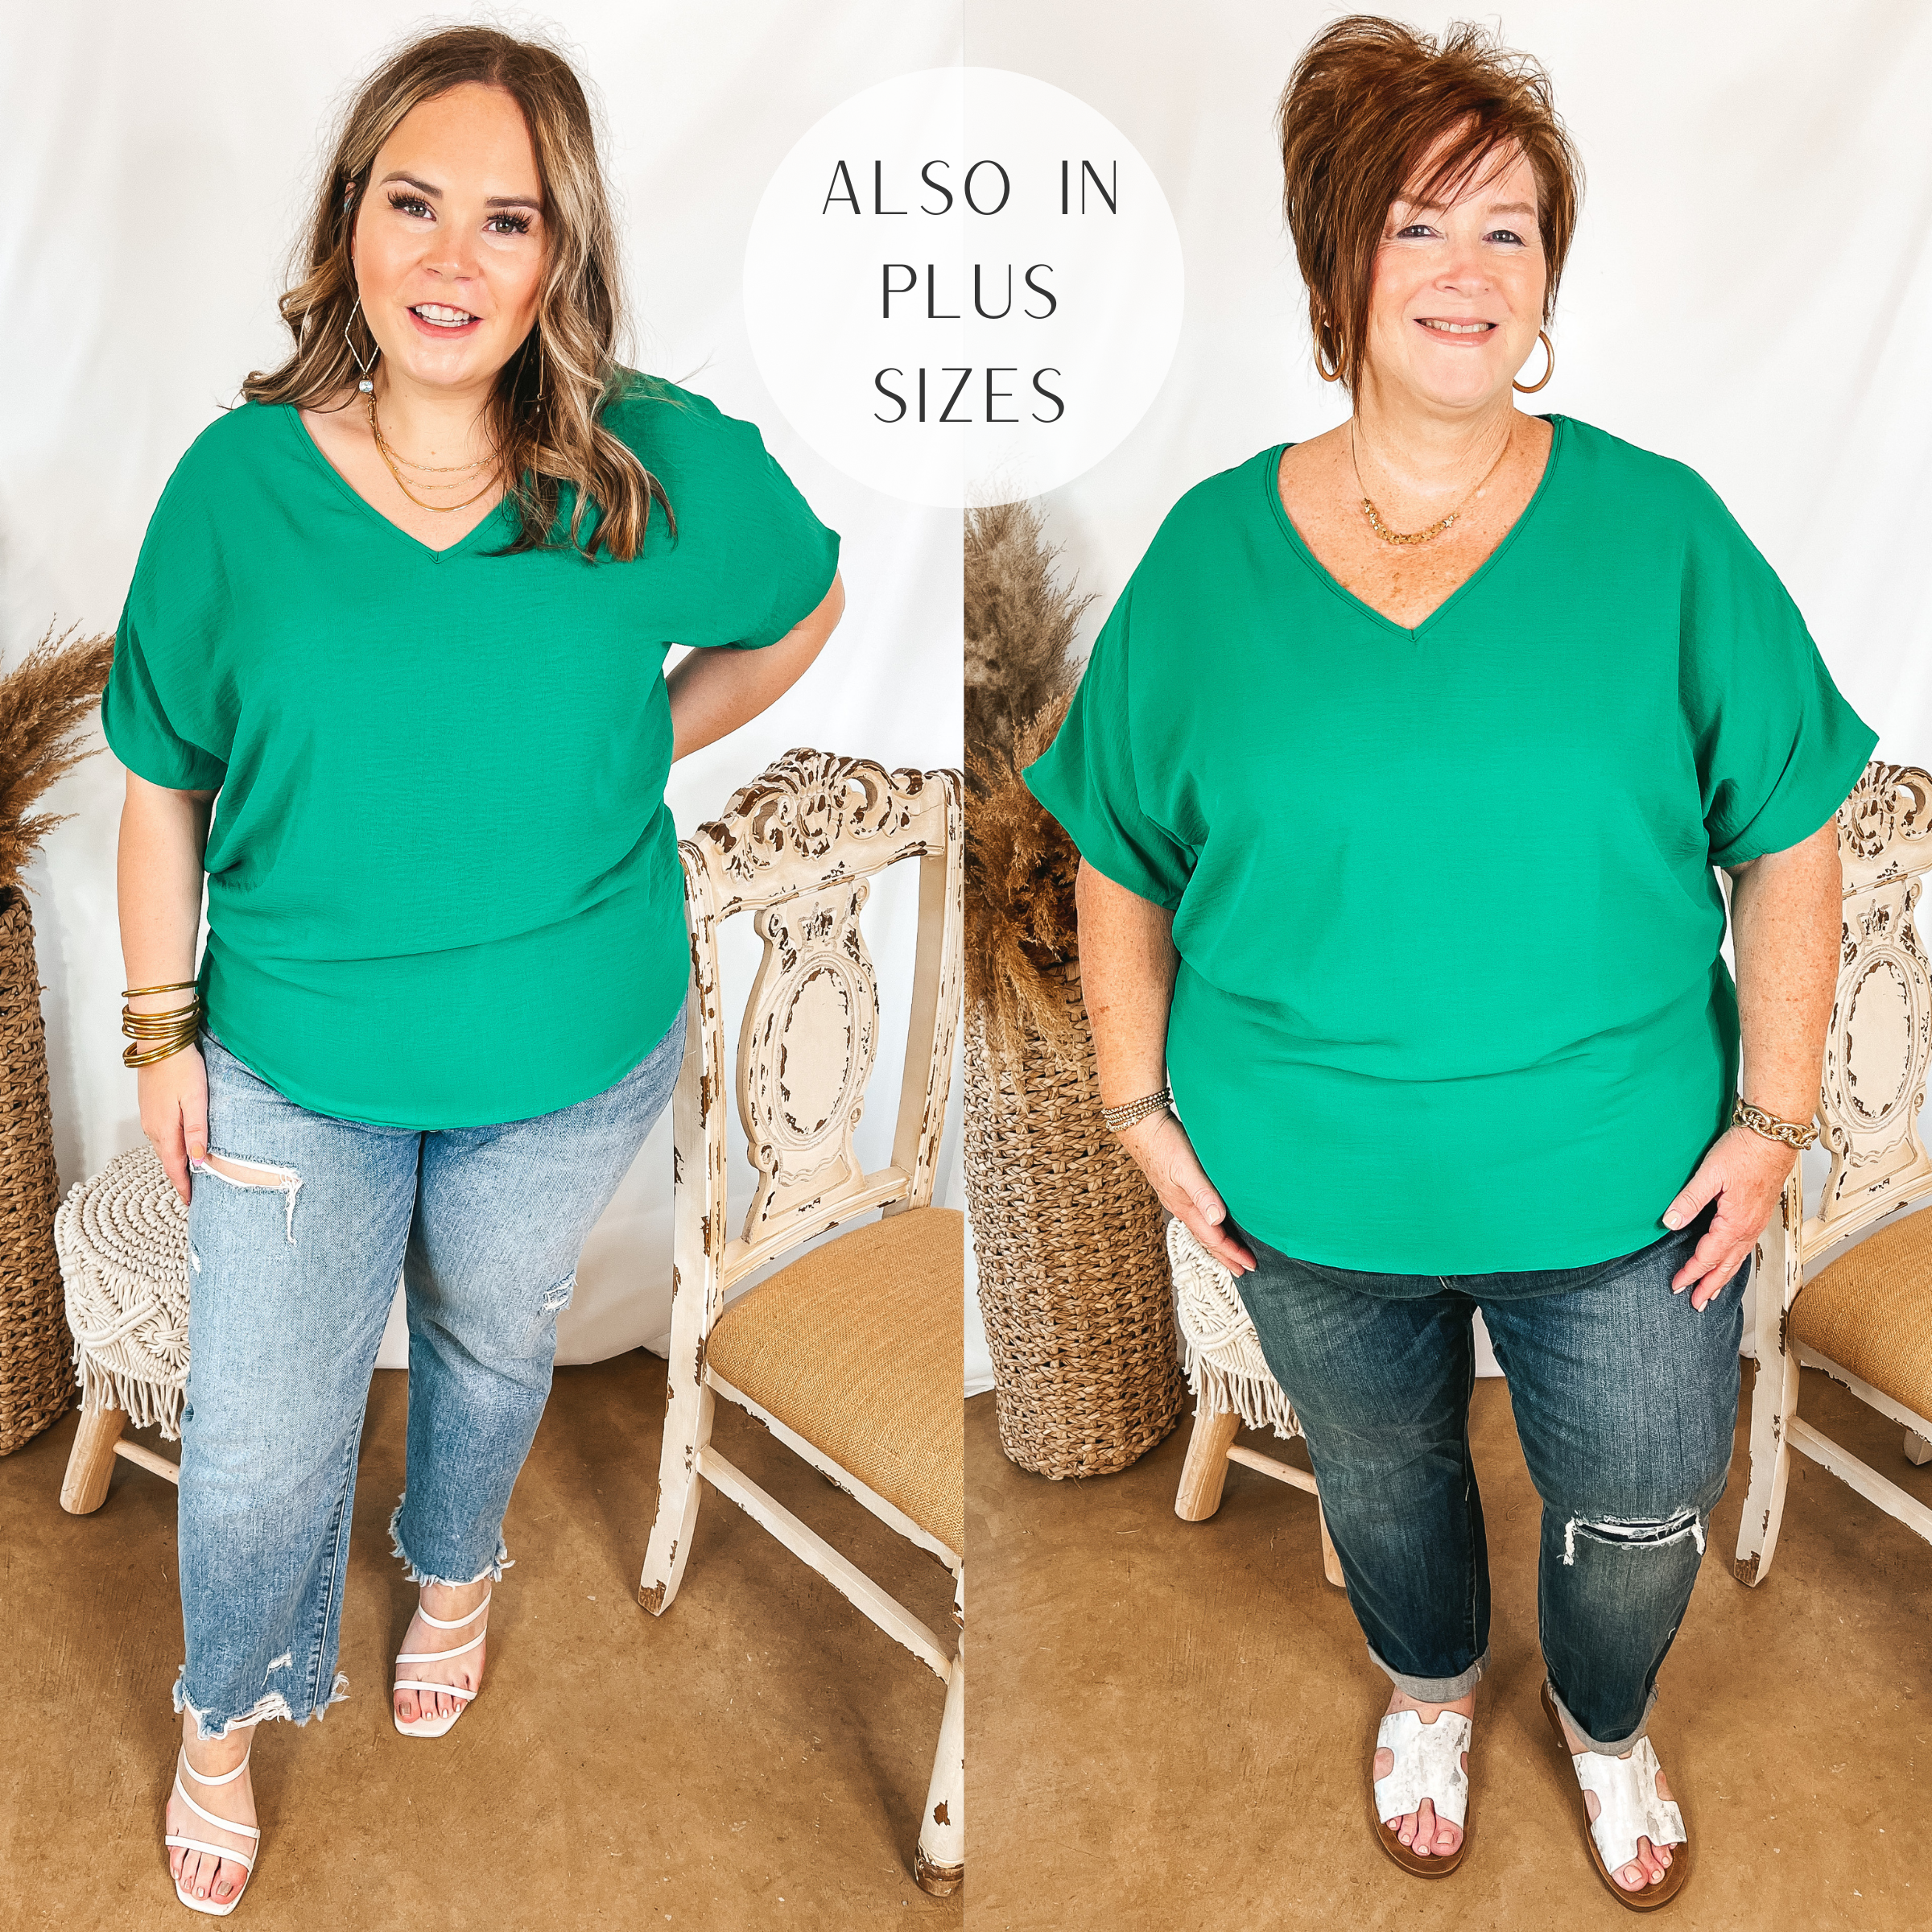 Models are wearing a kelly green v neck top. Size small model has it paired with light wash jeans, white strappy heels, and gold jewelry. Plus size model has it paired with dark wash jeans, white sandals, and gold jewelry.